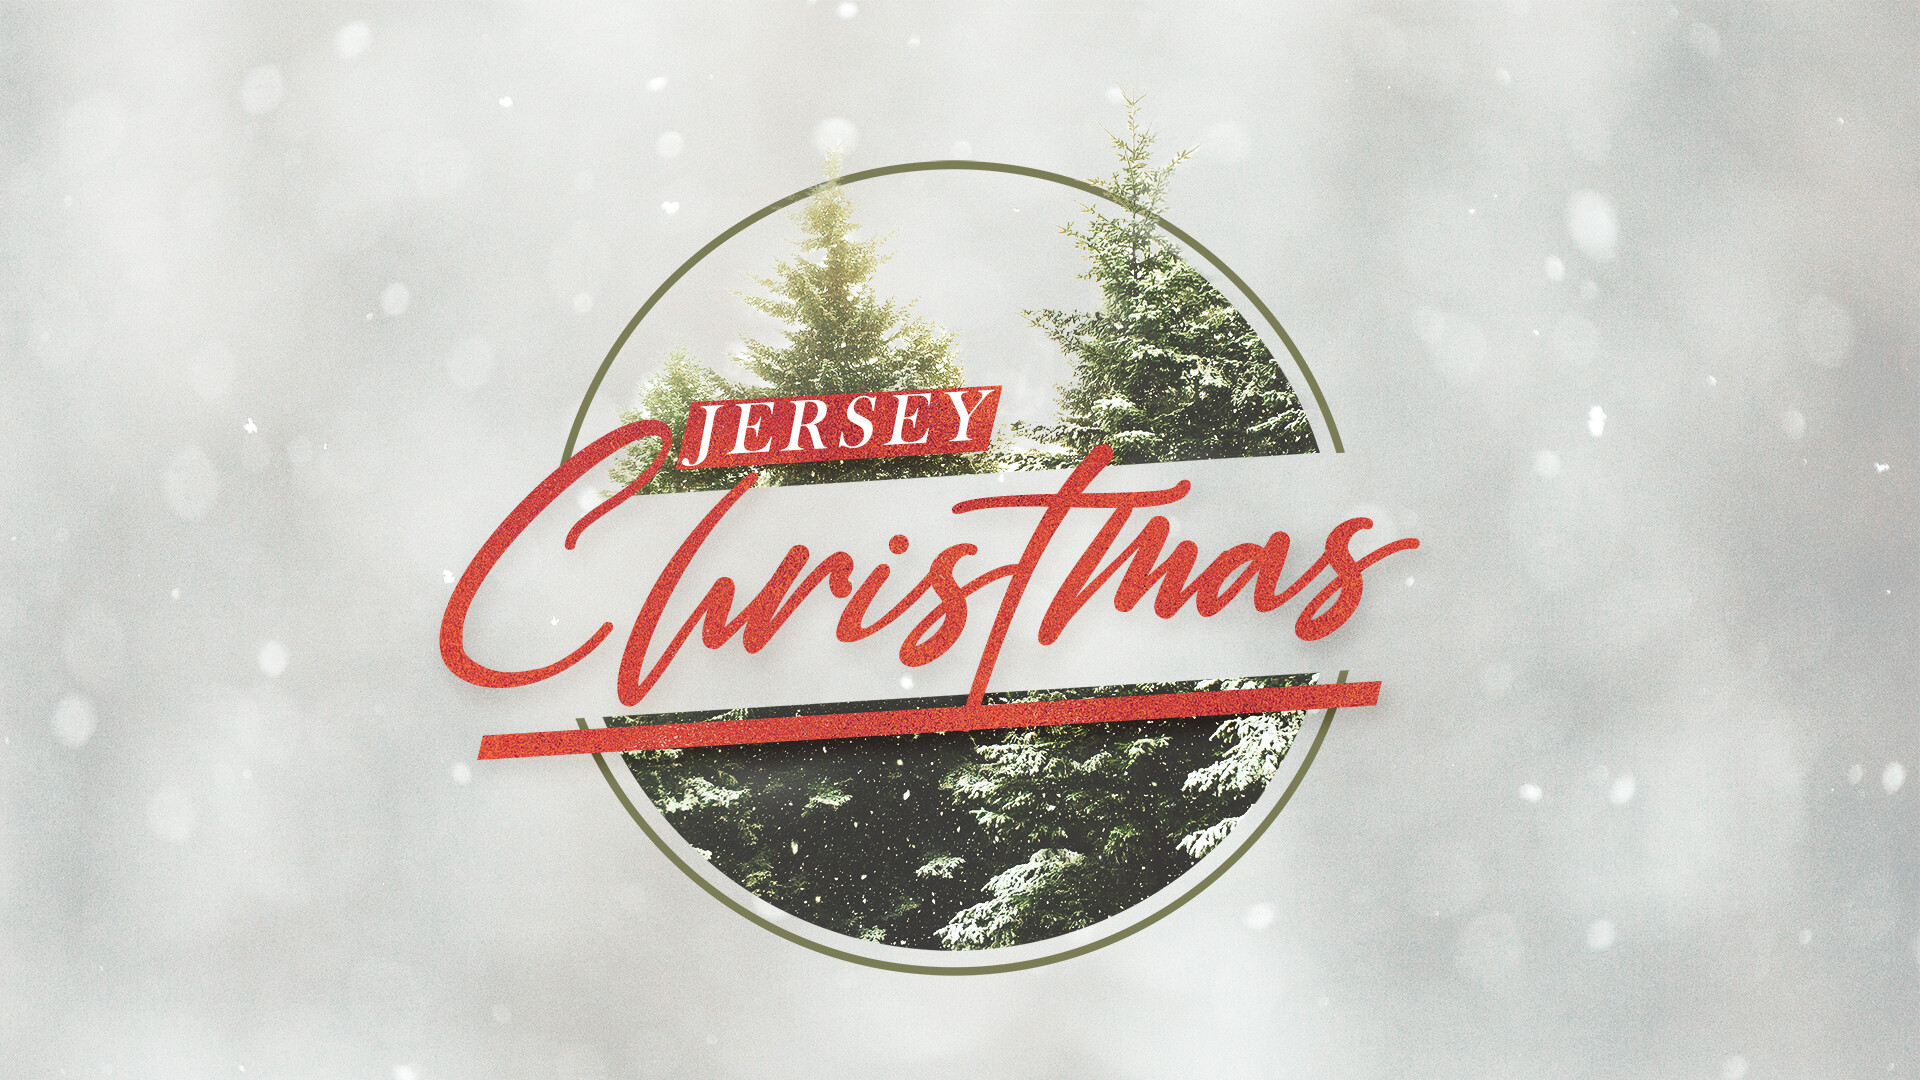 A Very Jersey Christmas